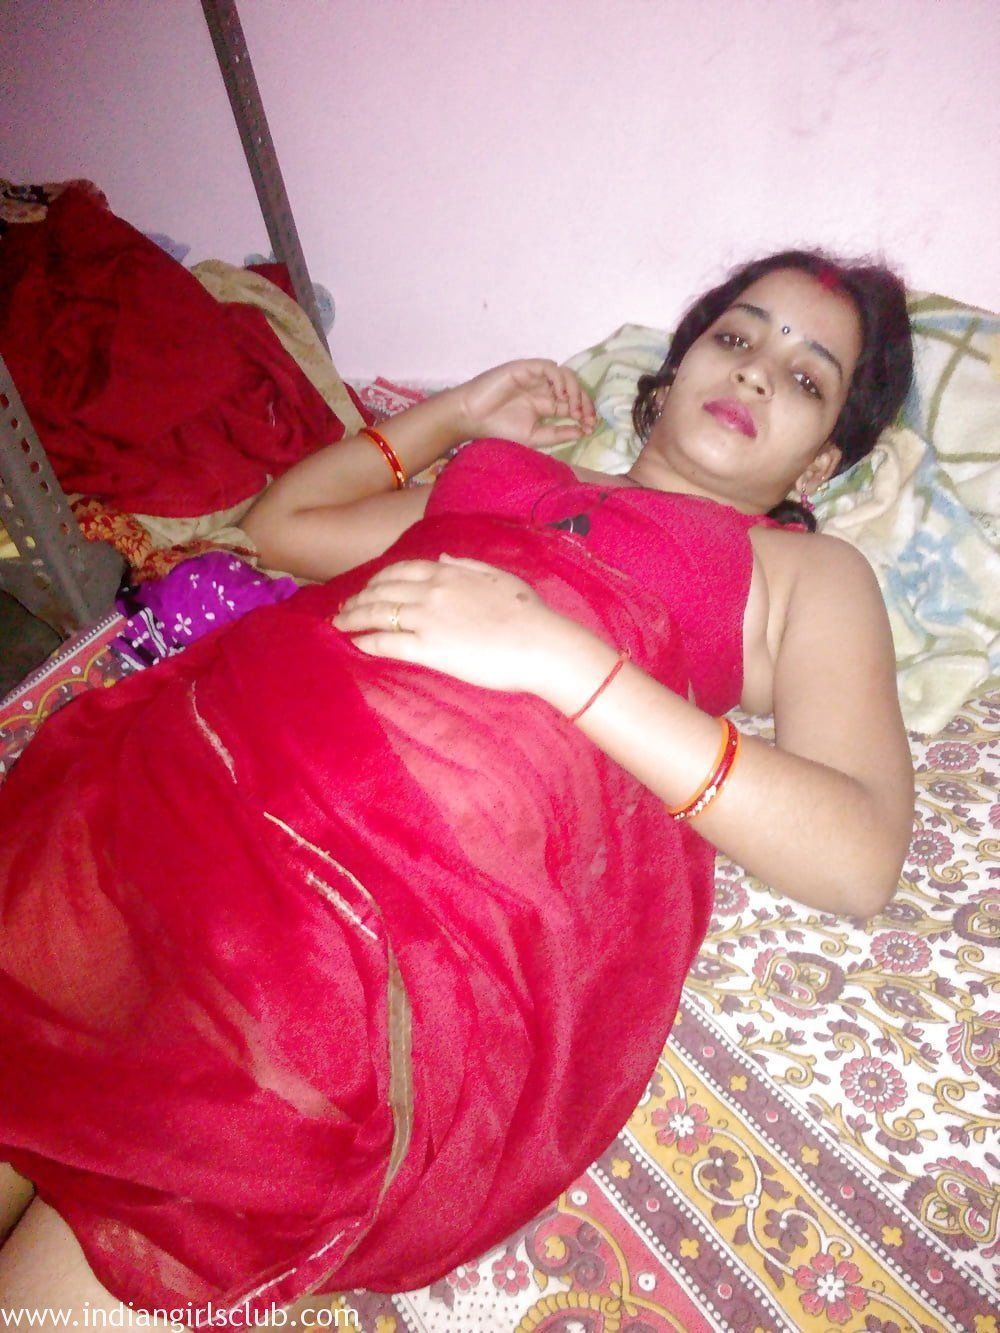 young indian girls club sex photo